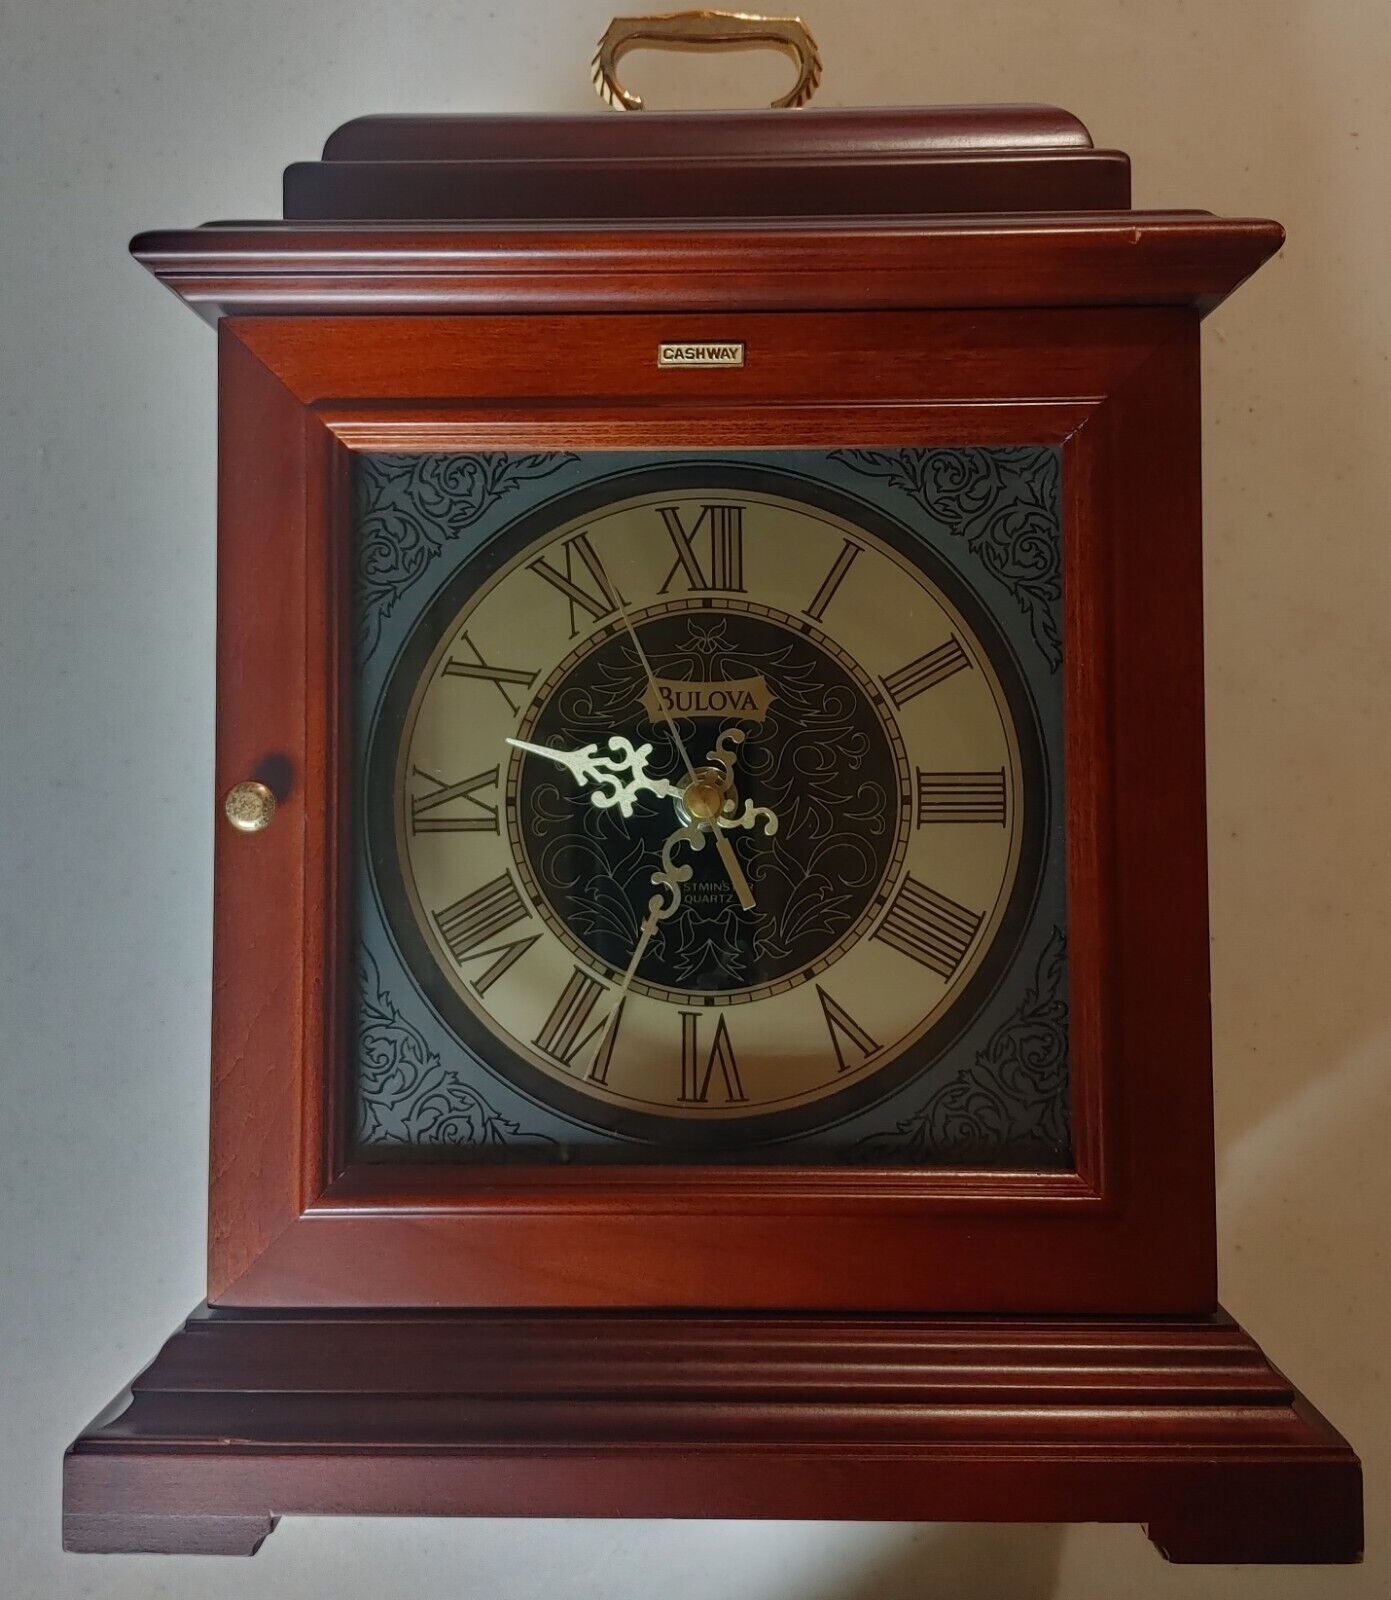 Bulova B1873 mantel clock With Westminster Chime.